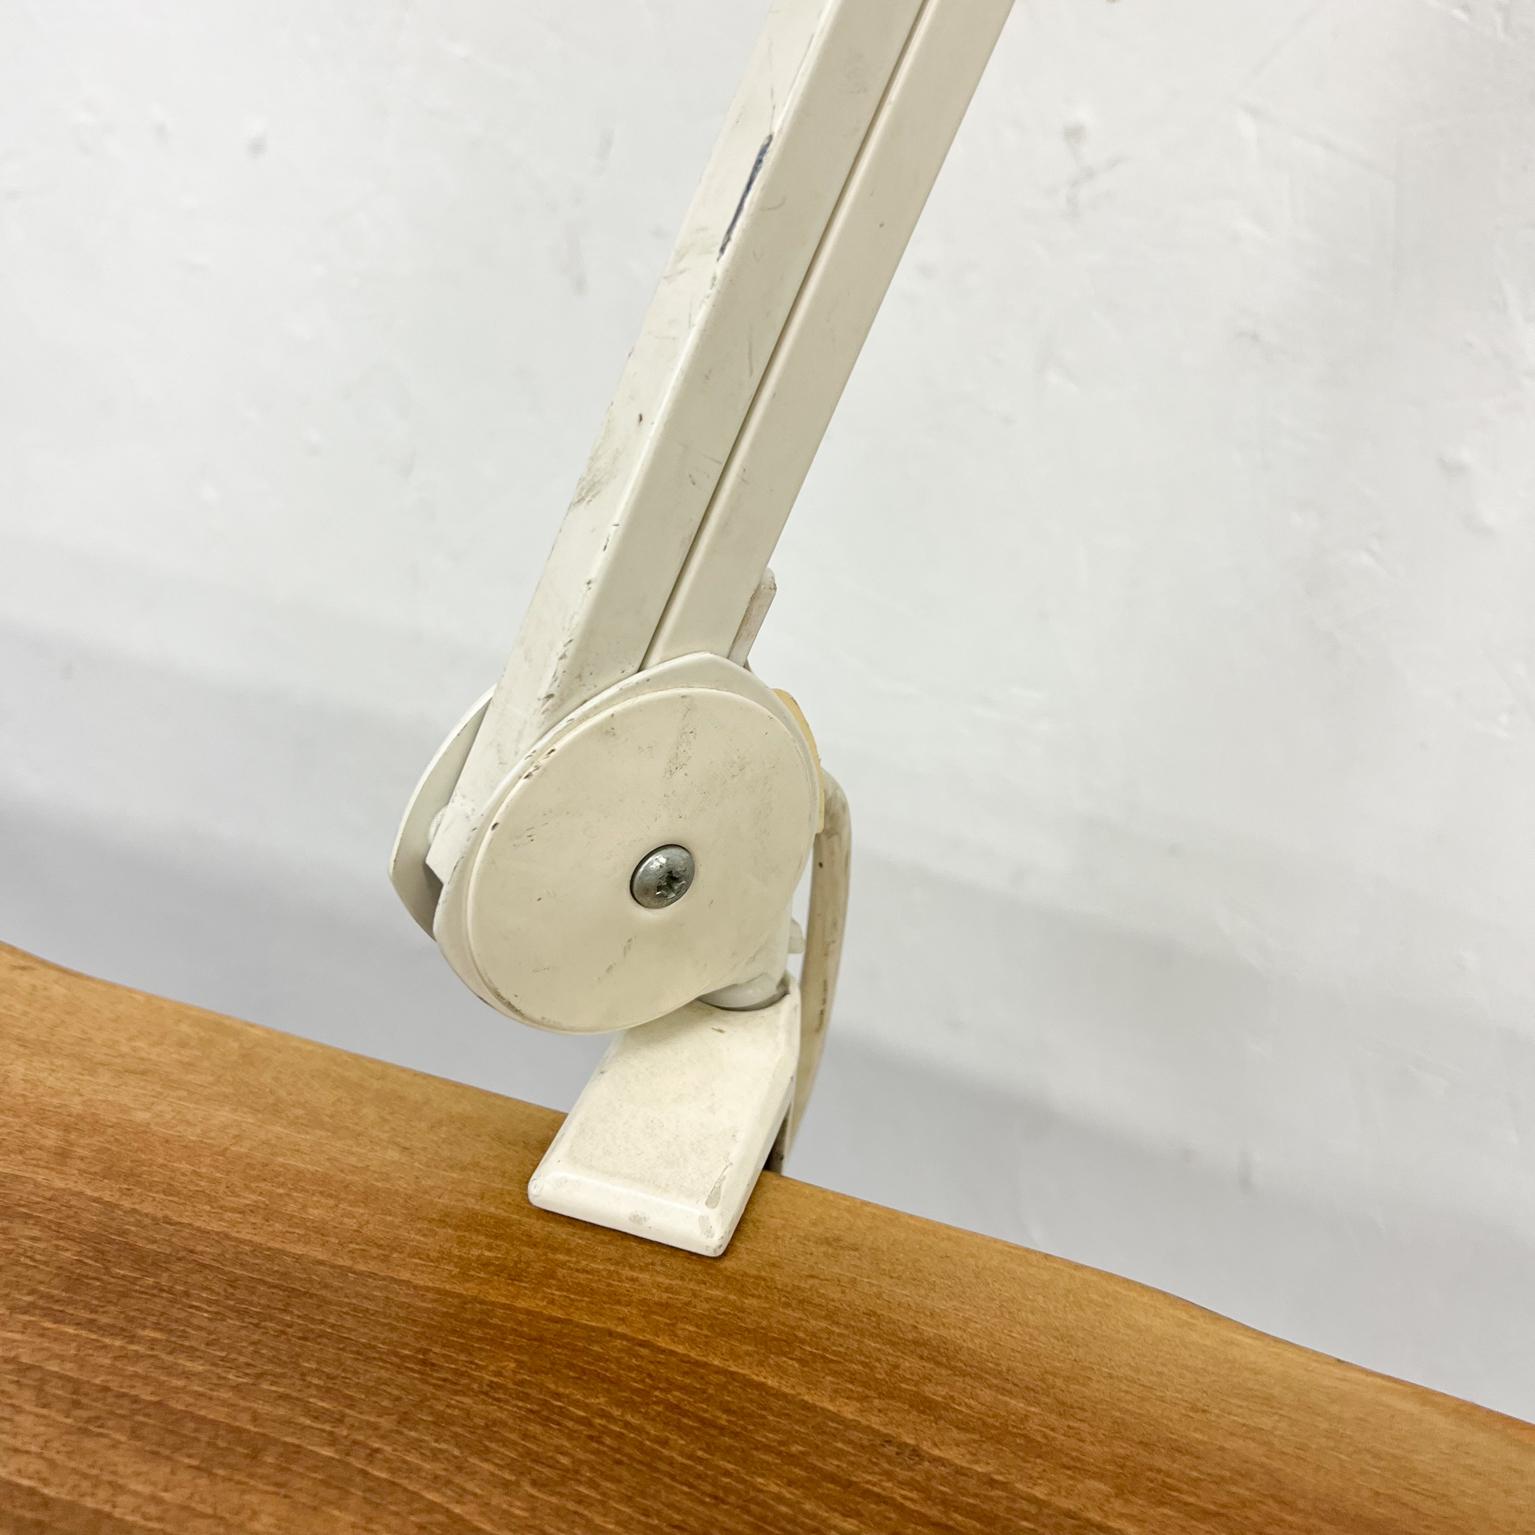 1970s LUXO Architect Rare Vintage Task Clamp Lamp for Desk Jac Jacobsen In Good Condition For Sale In Chula Vista, CA